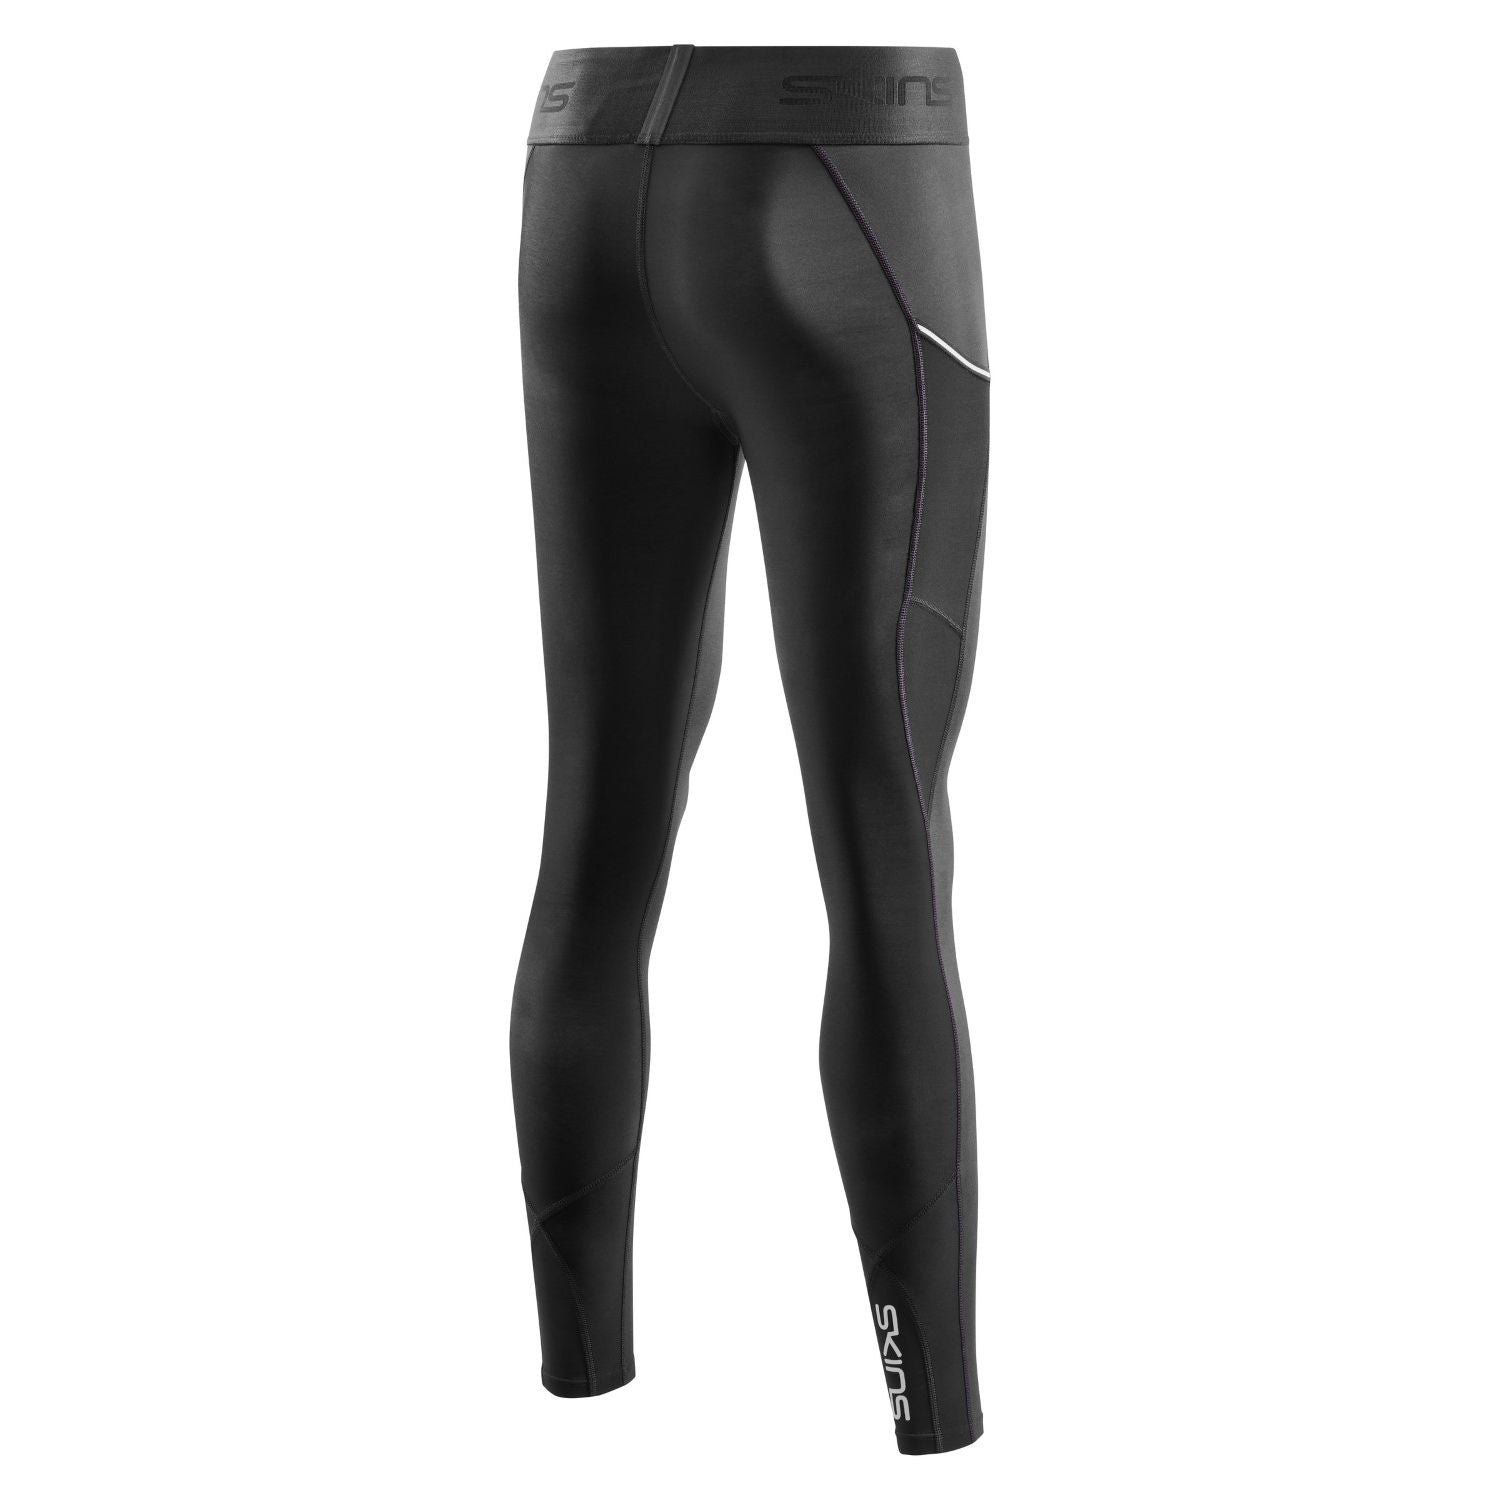 Women's SKINS Series 3 Thermal Compression Tights {SK-ST40301119}